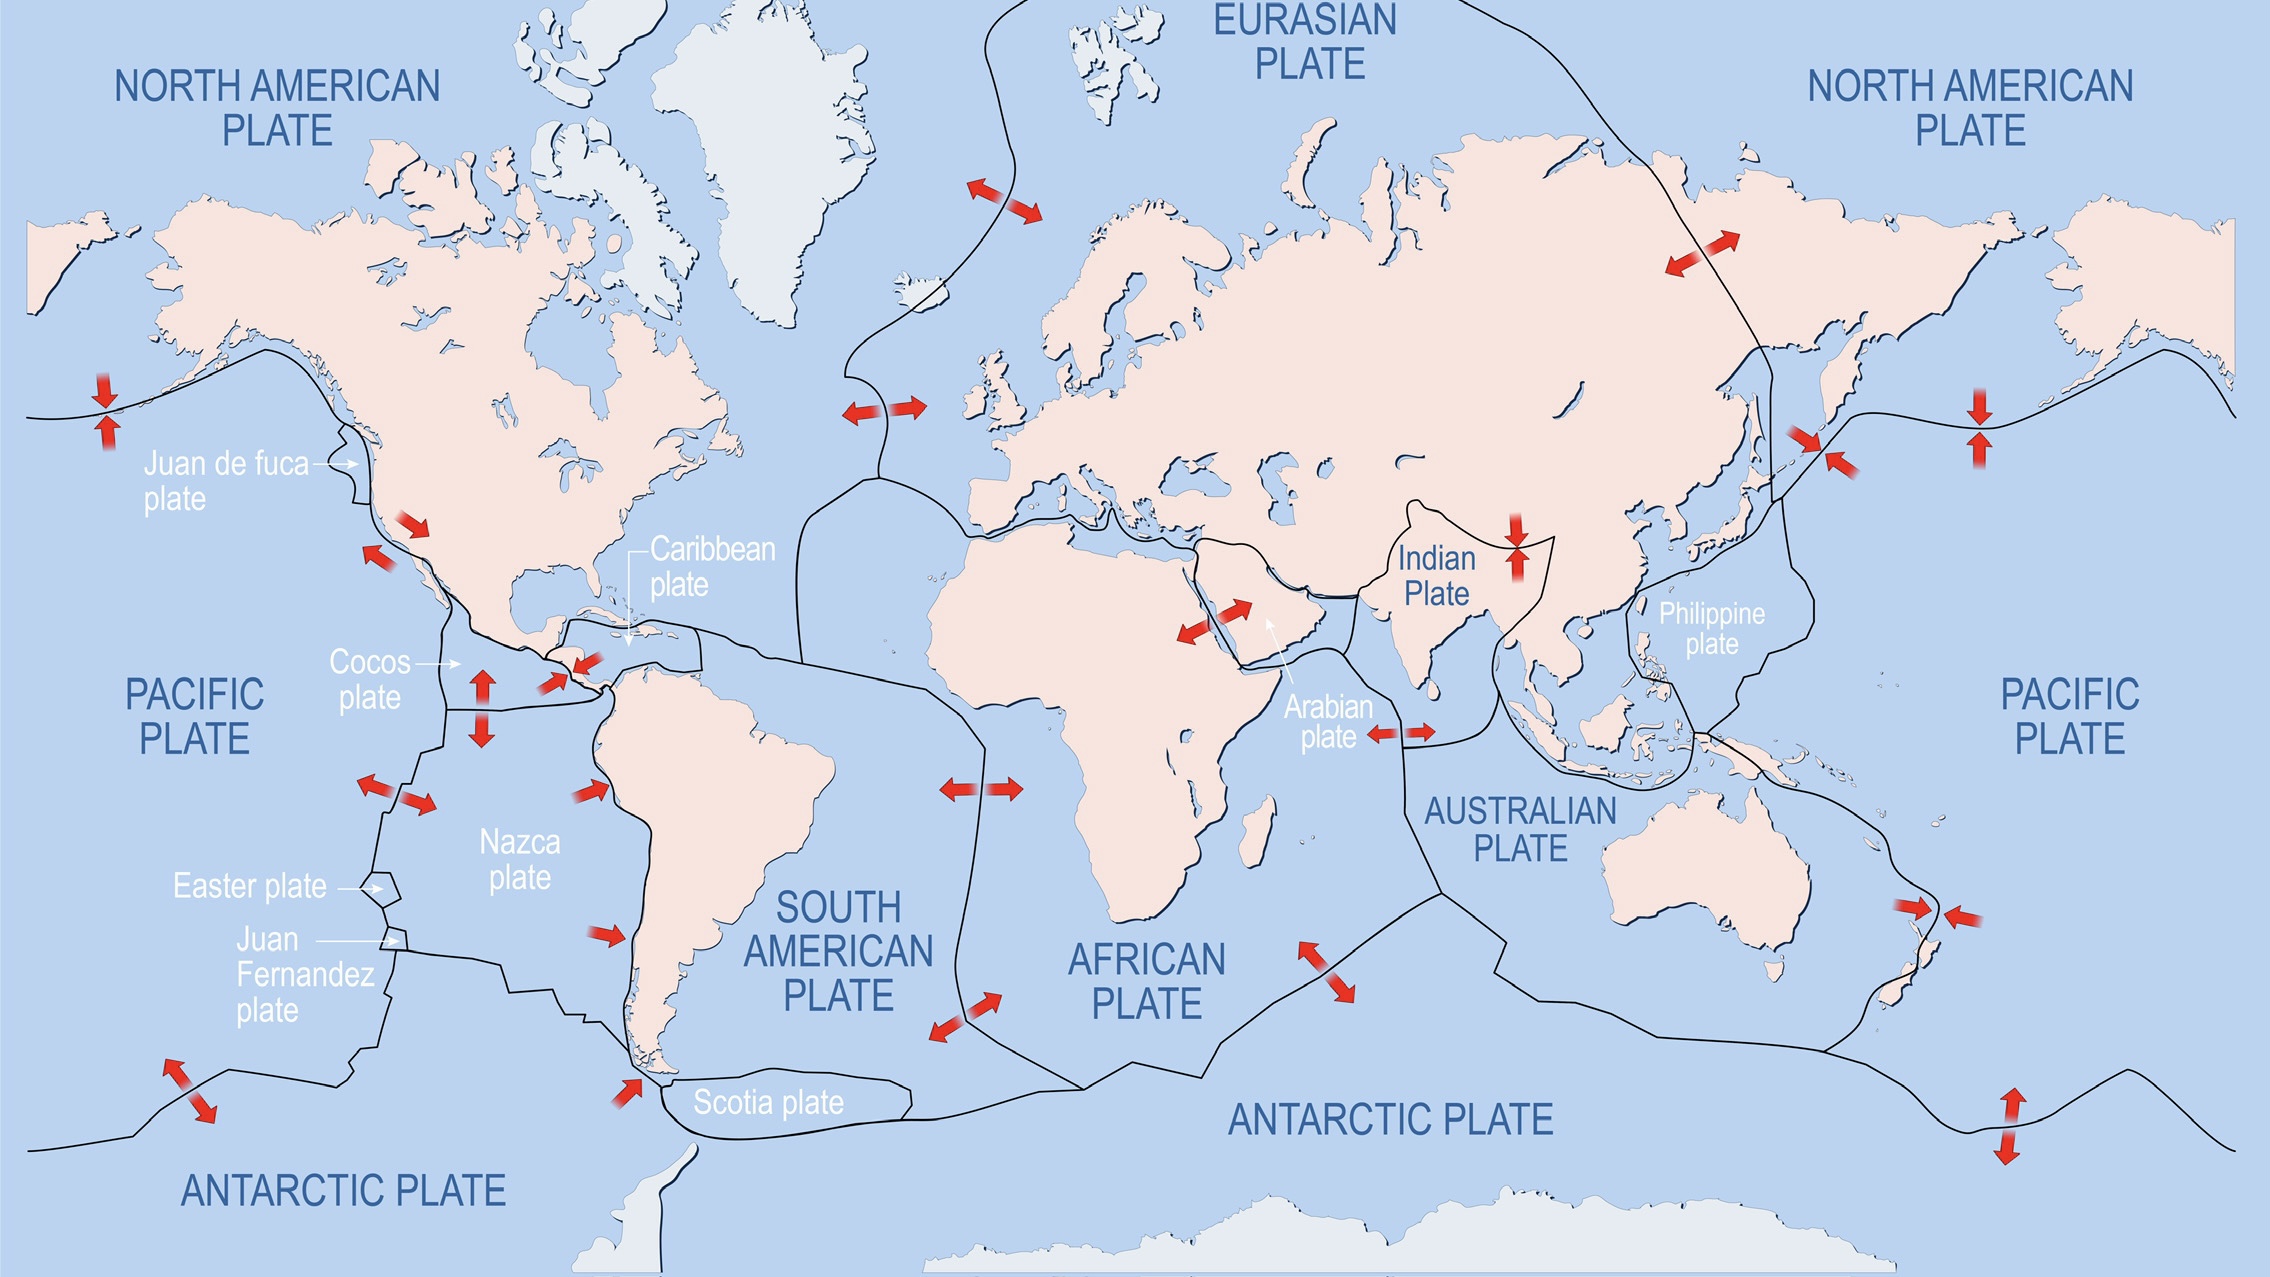 tectonic plates map ring of fire